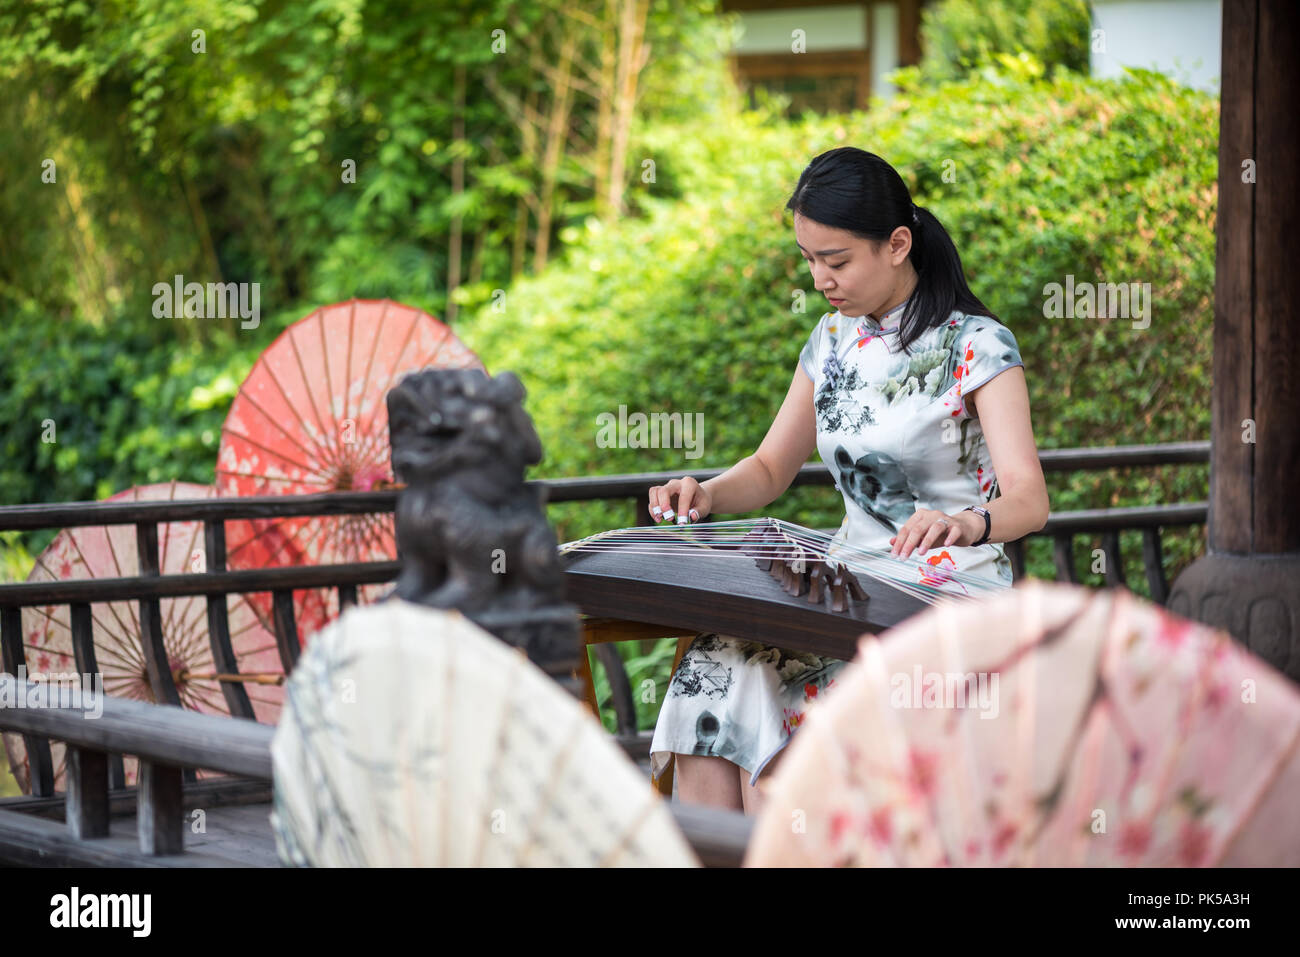 Anren, Sichuan province, China - Aug 26, 2018 : Woman playing Guzheng traditional chinese music string instrument Stock Photo